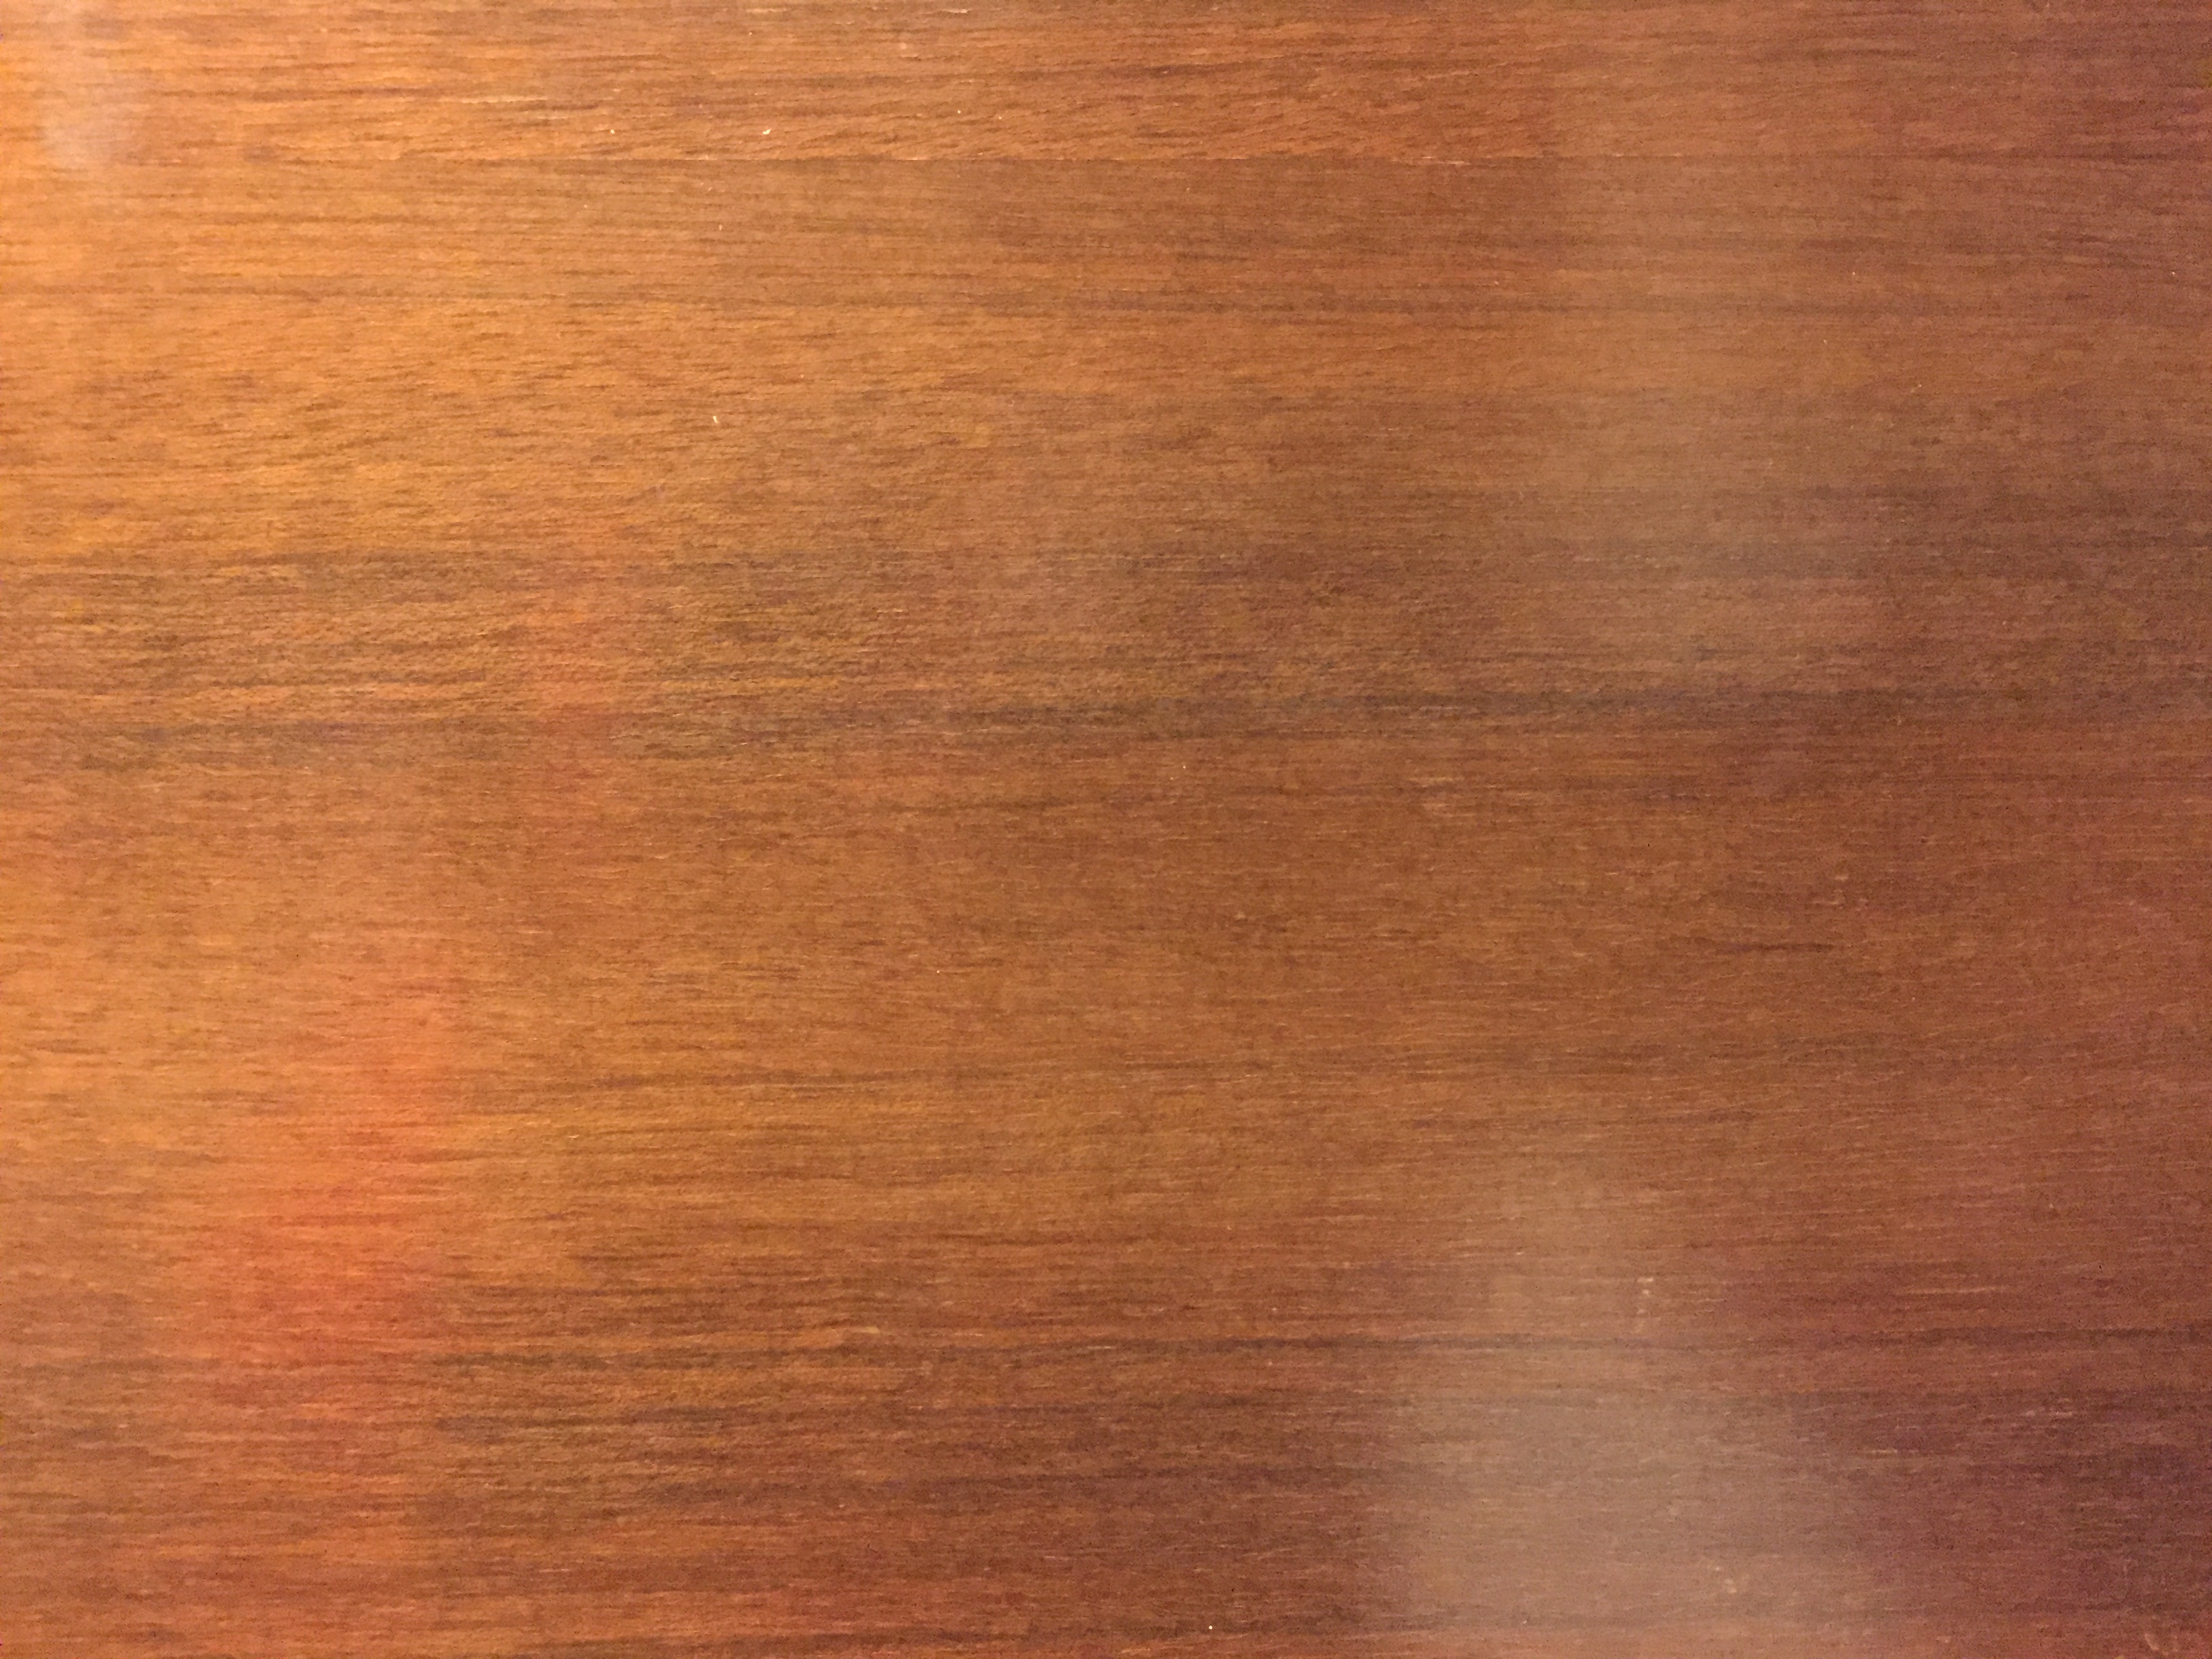 Cherry finish on glossy wood table surface